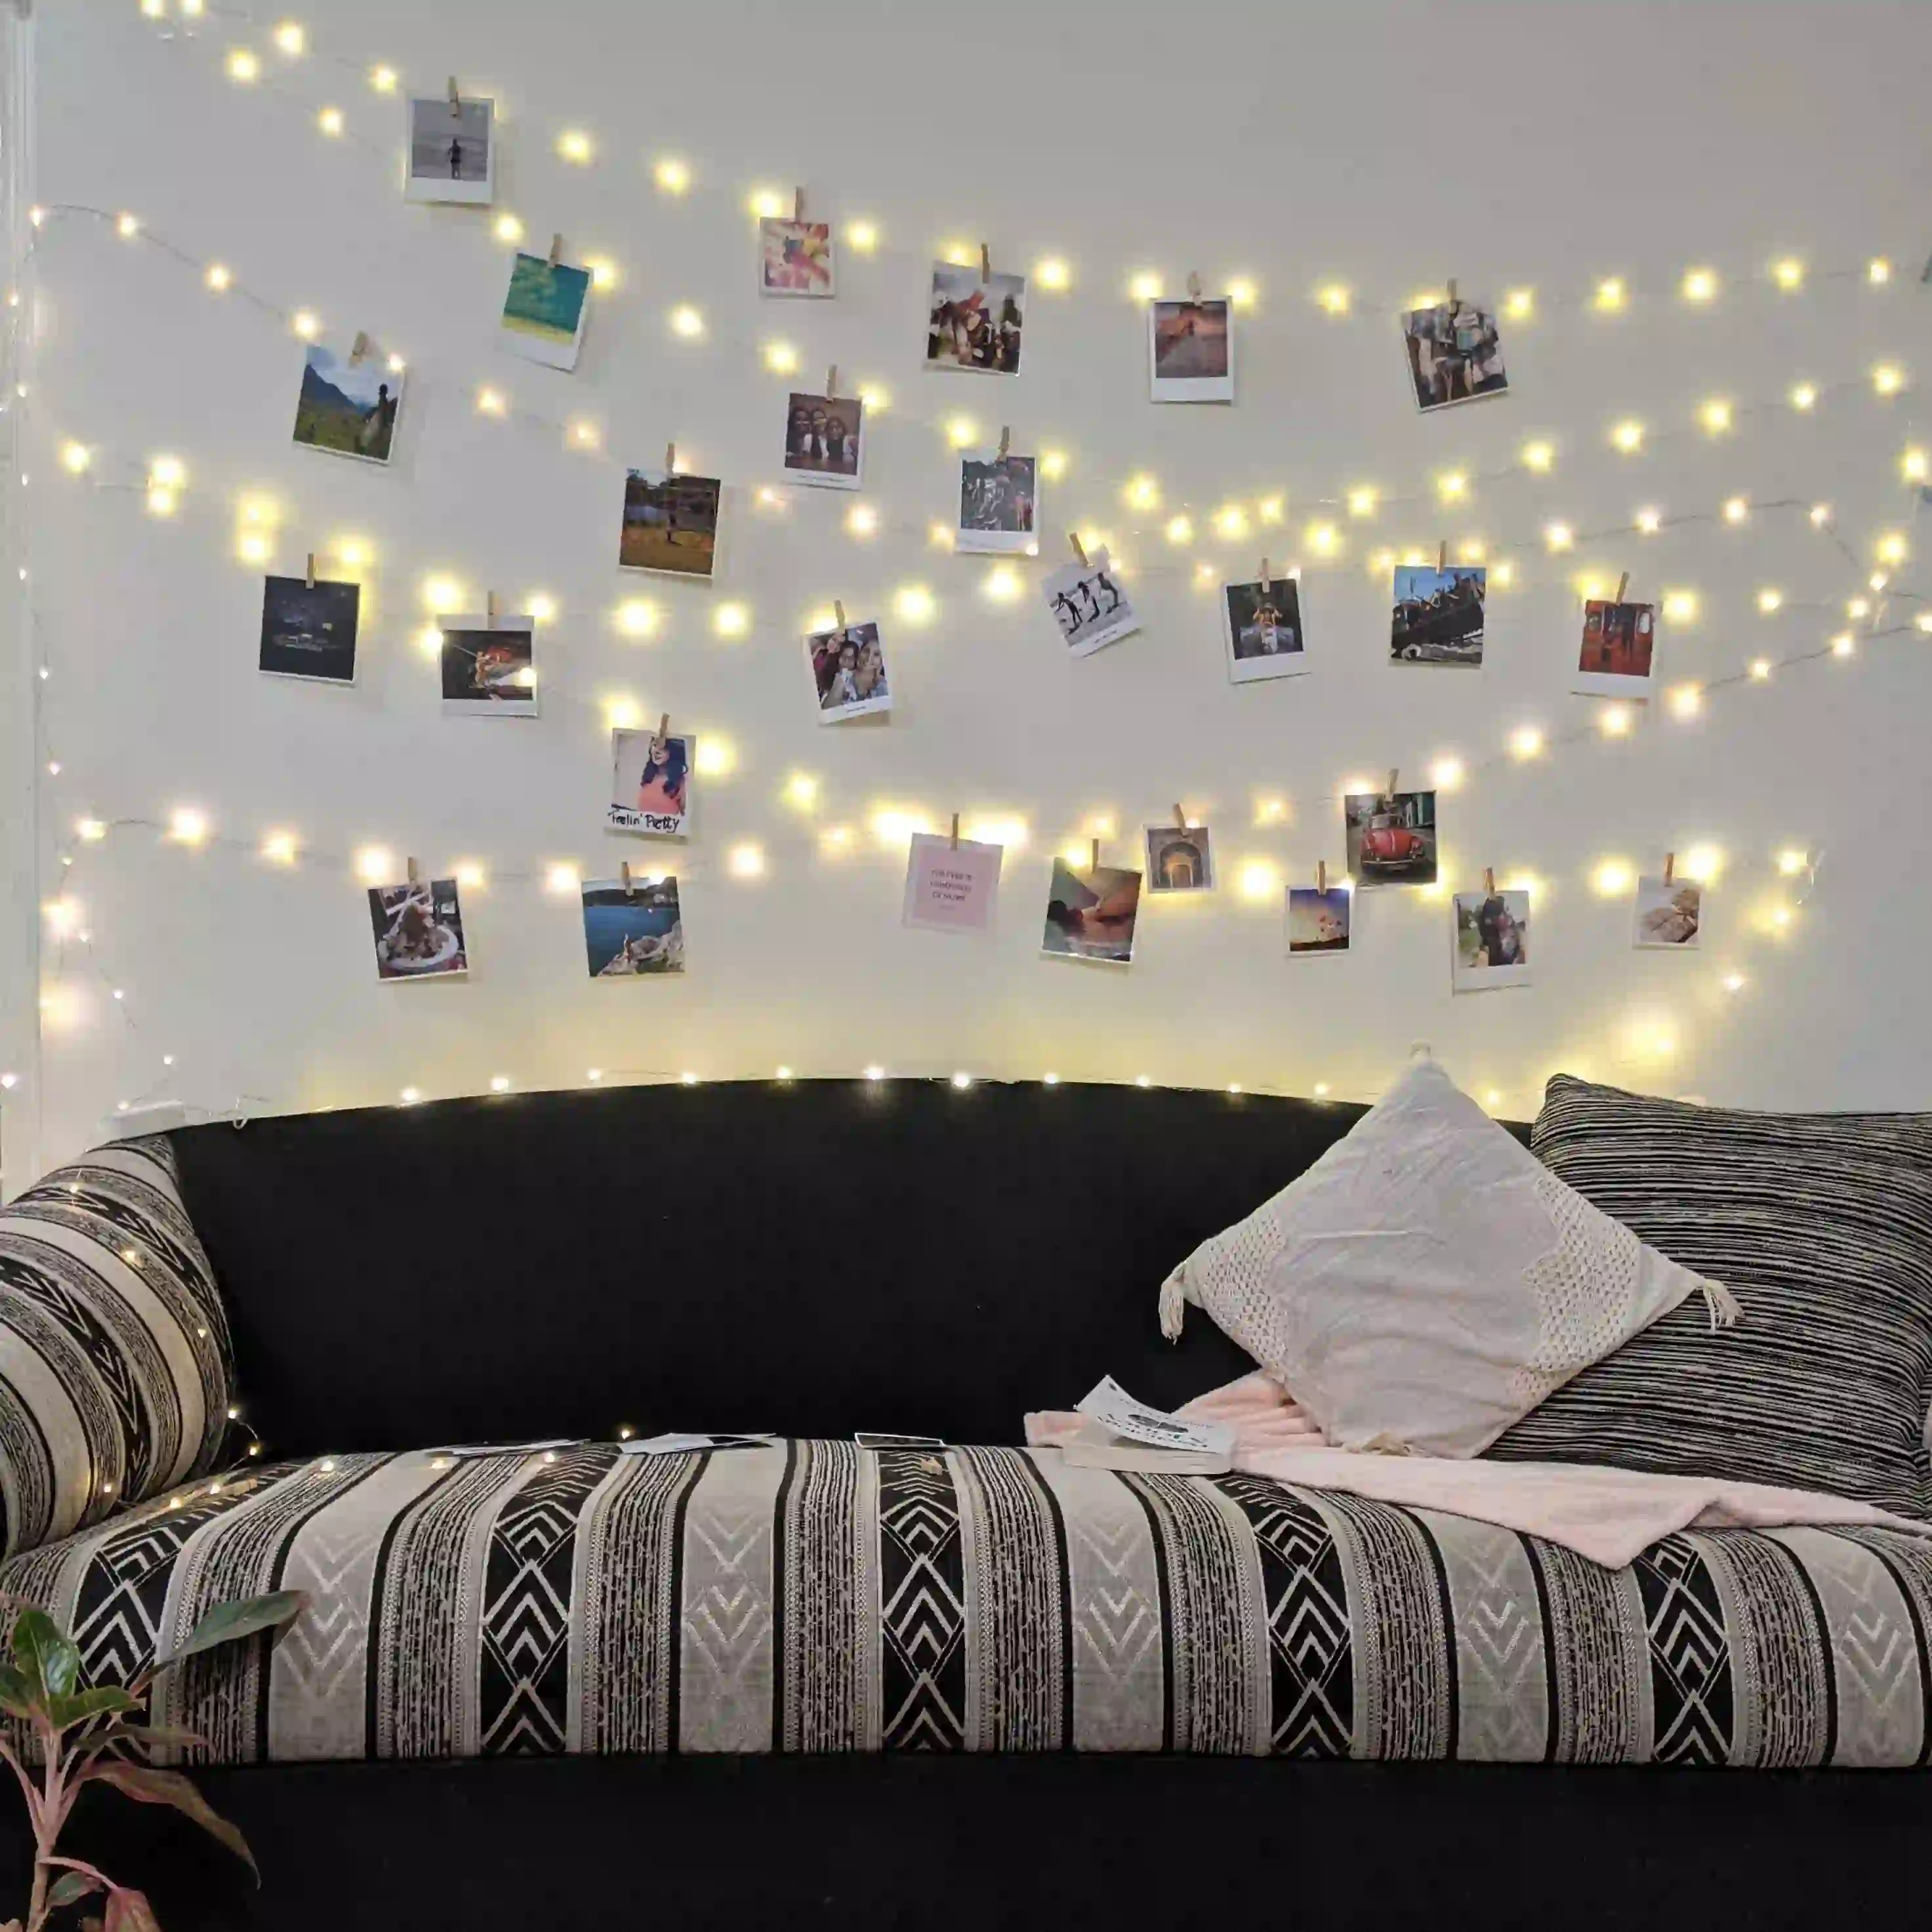 Polaroids hanging on wall with lights